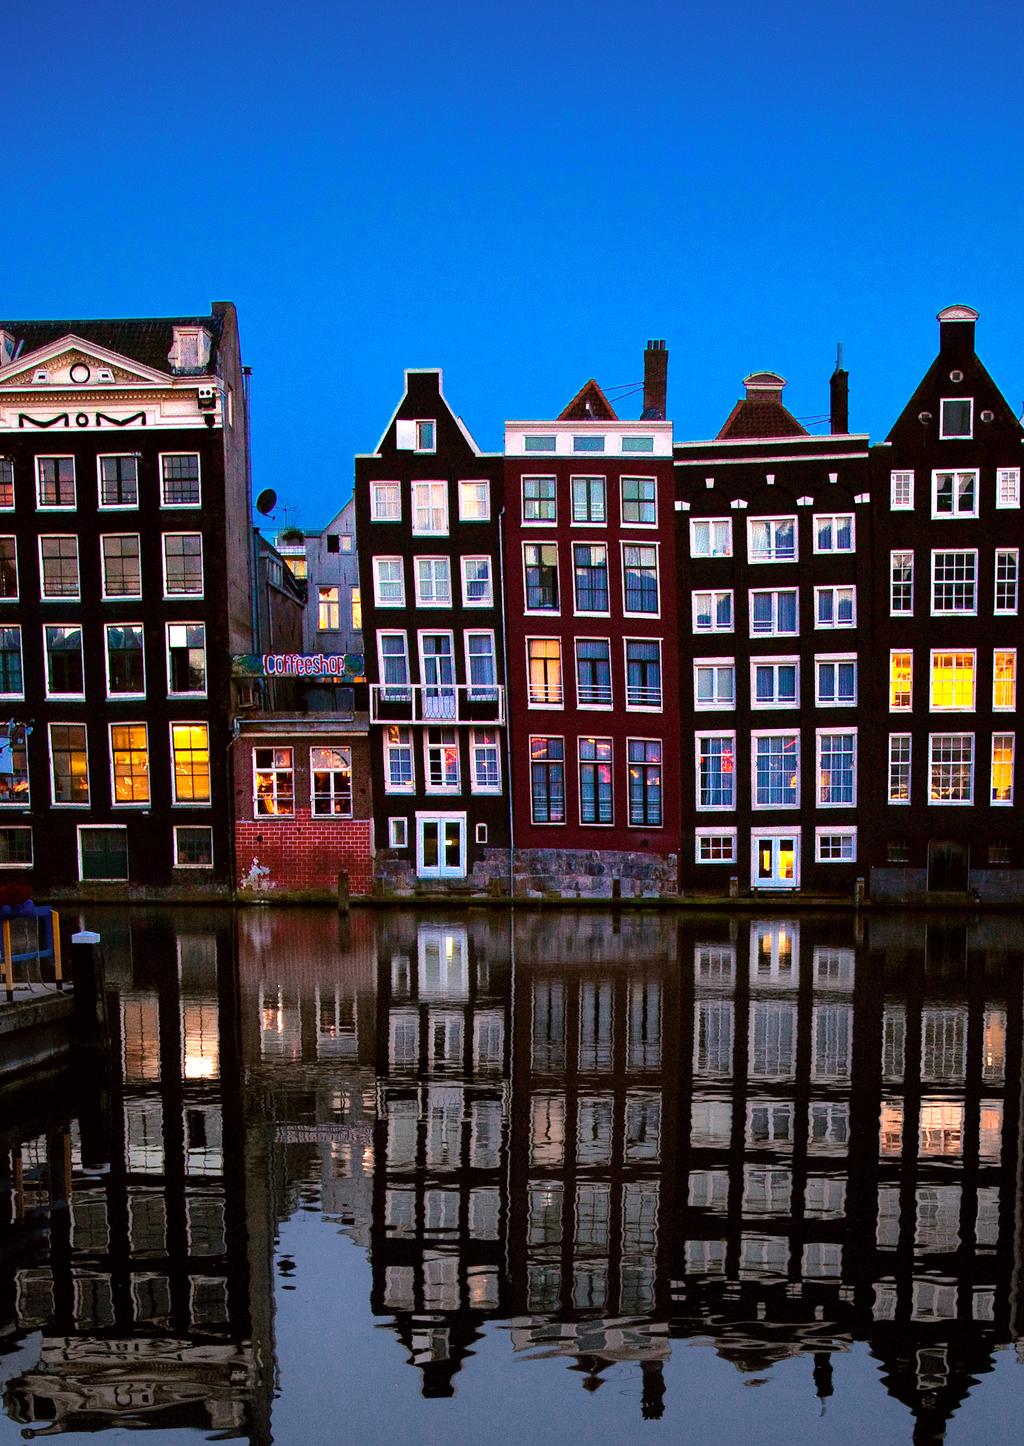 The Concierge of Amsterdam Concierge Amsterdam arranges premium experiences in Amsterdam. Based on local knowledge and extensive network, we make everything possible in Amsterdam.